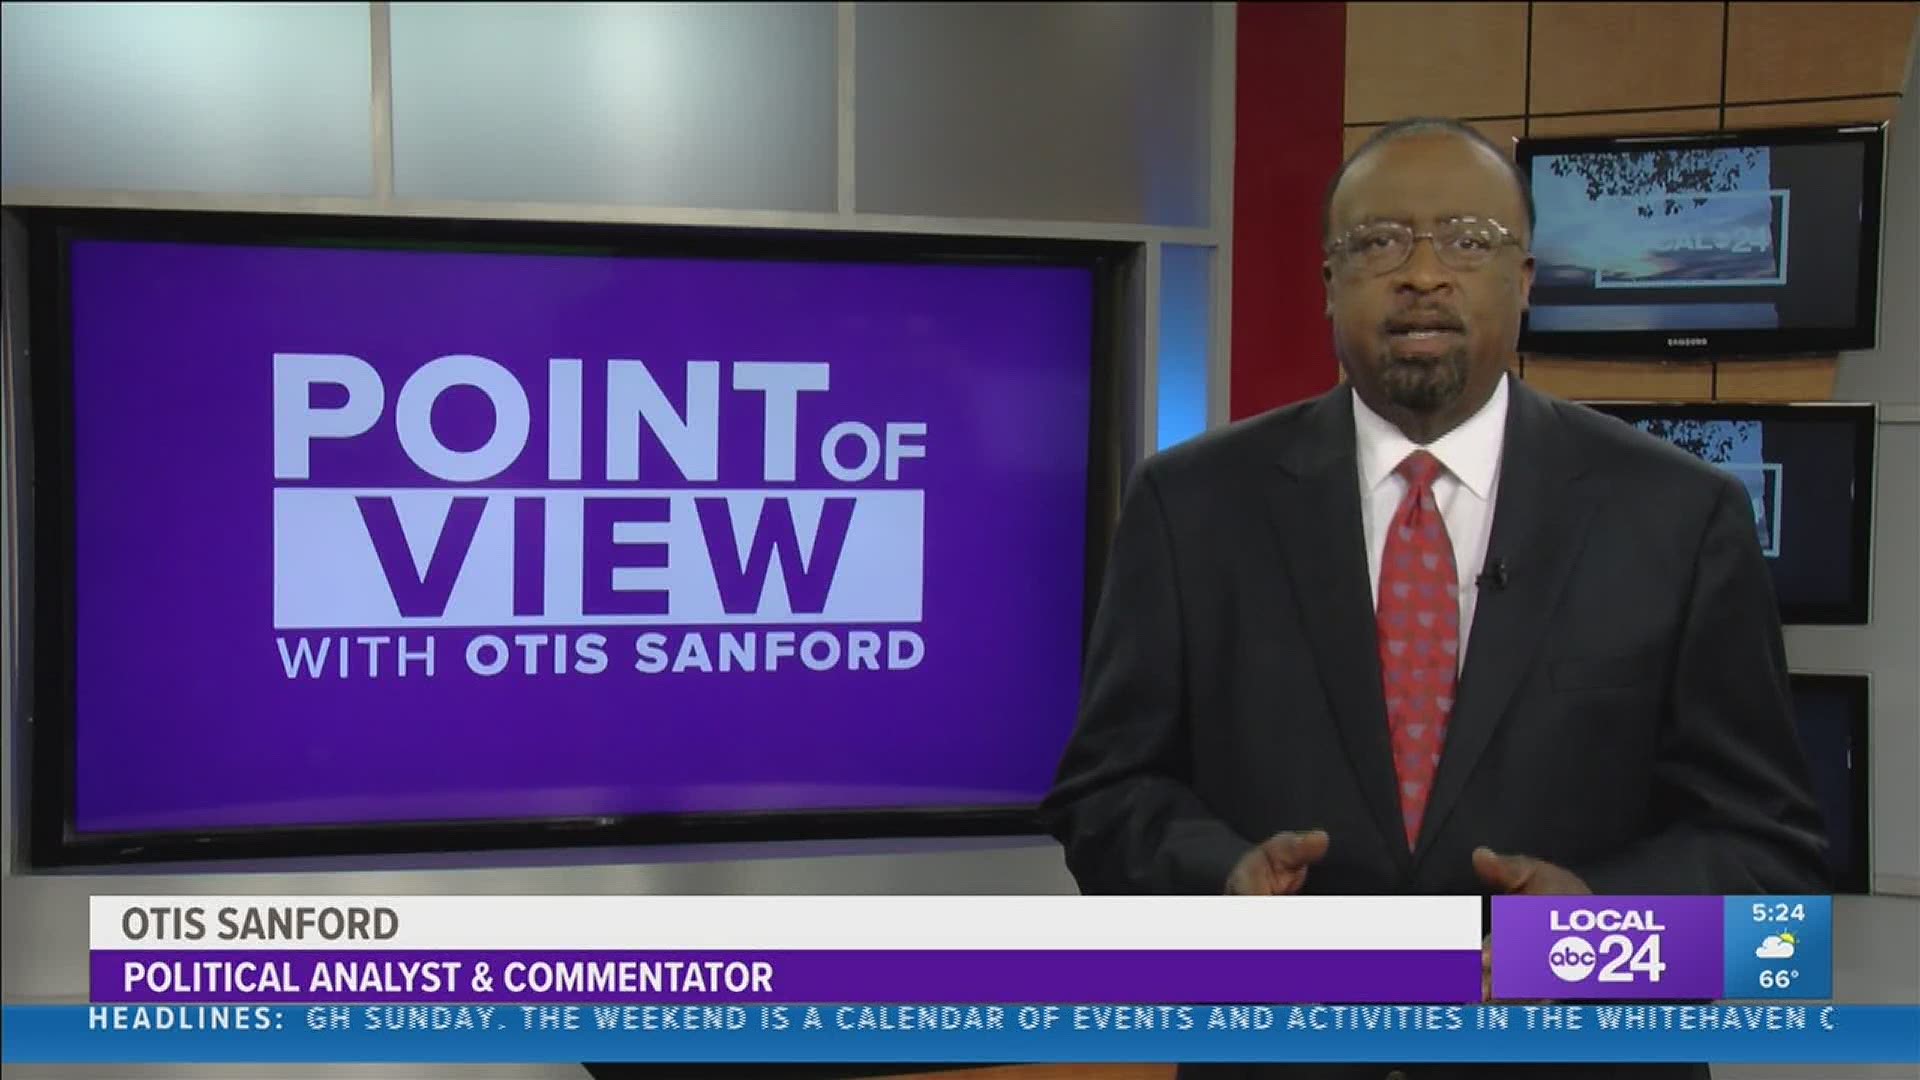 Local 24 News political analyst and commentator Otis Sanford shares his point of view on a brouhaha at the Memphis City Council.